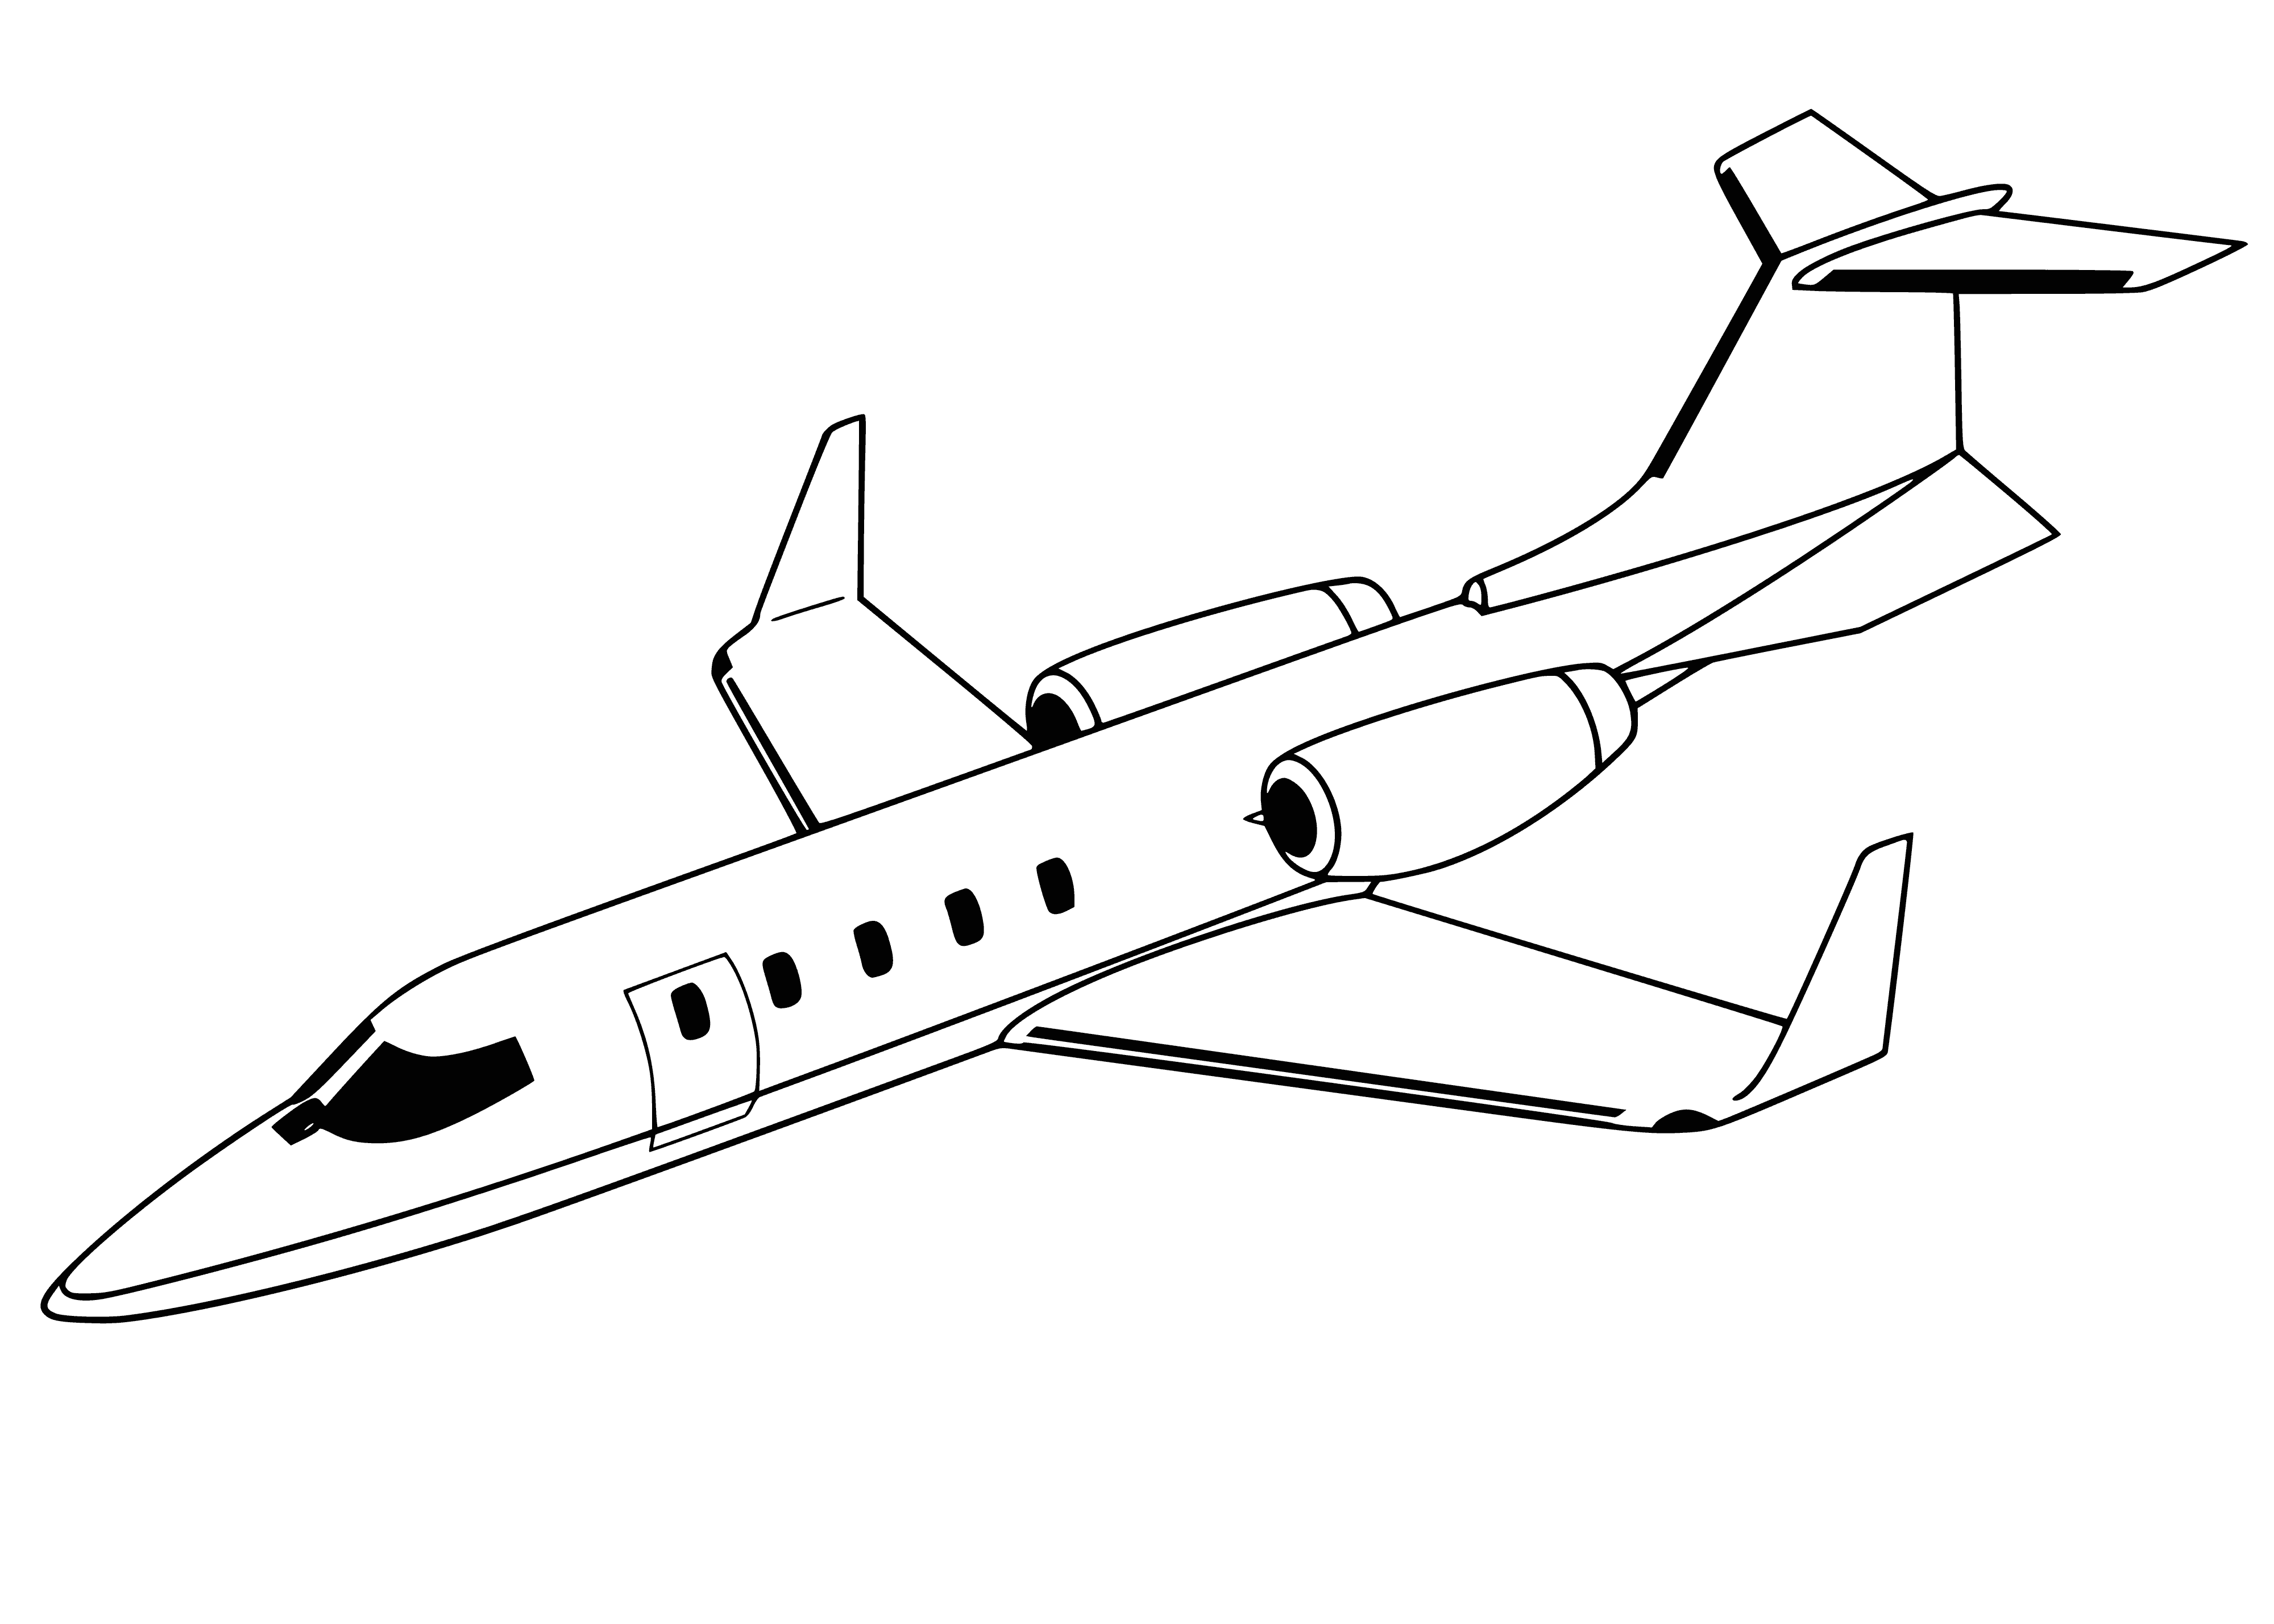 coloring page: Small plane w/green body & yellow wings. Has propeller on front & rockets on back.